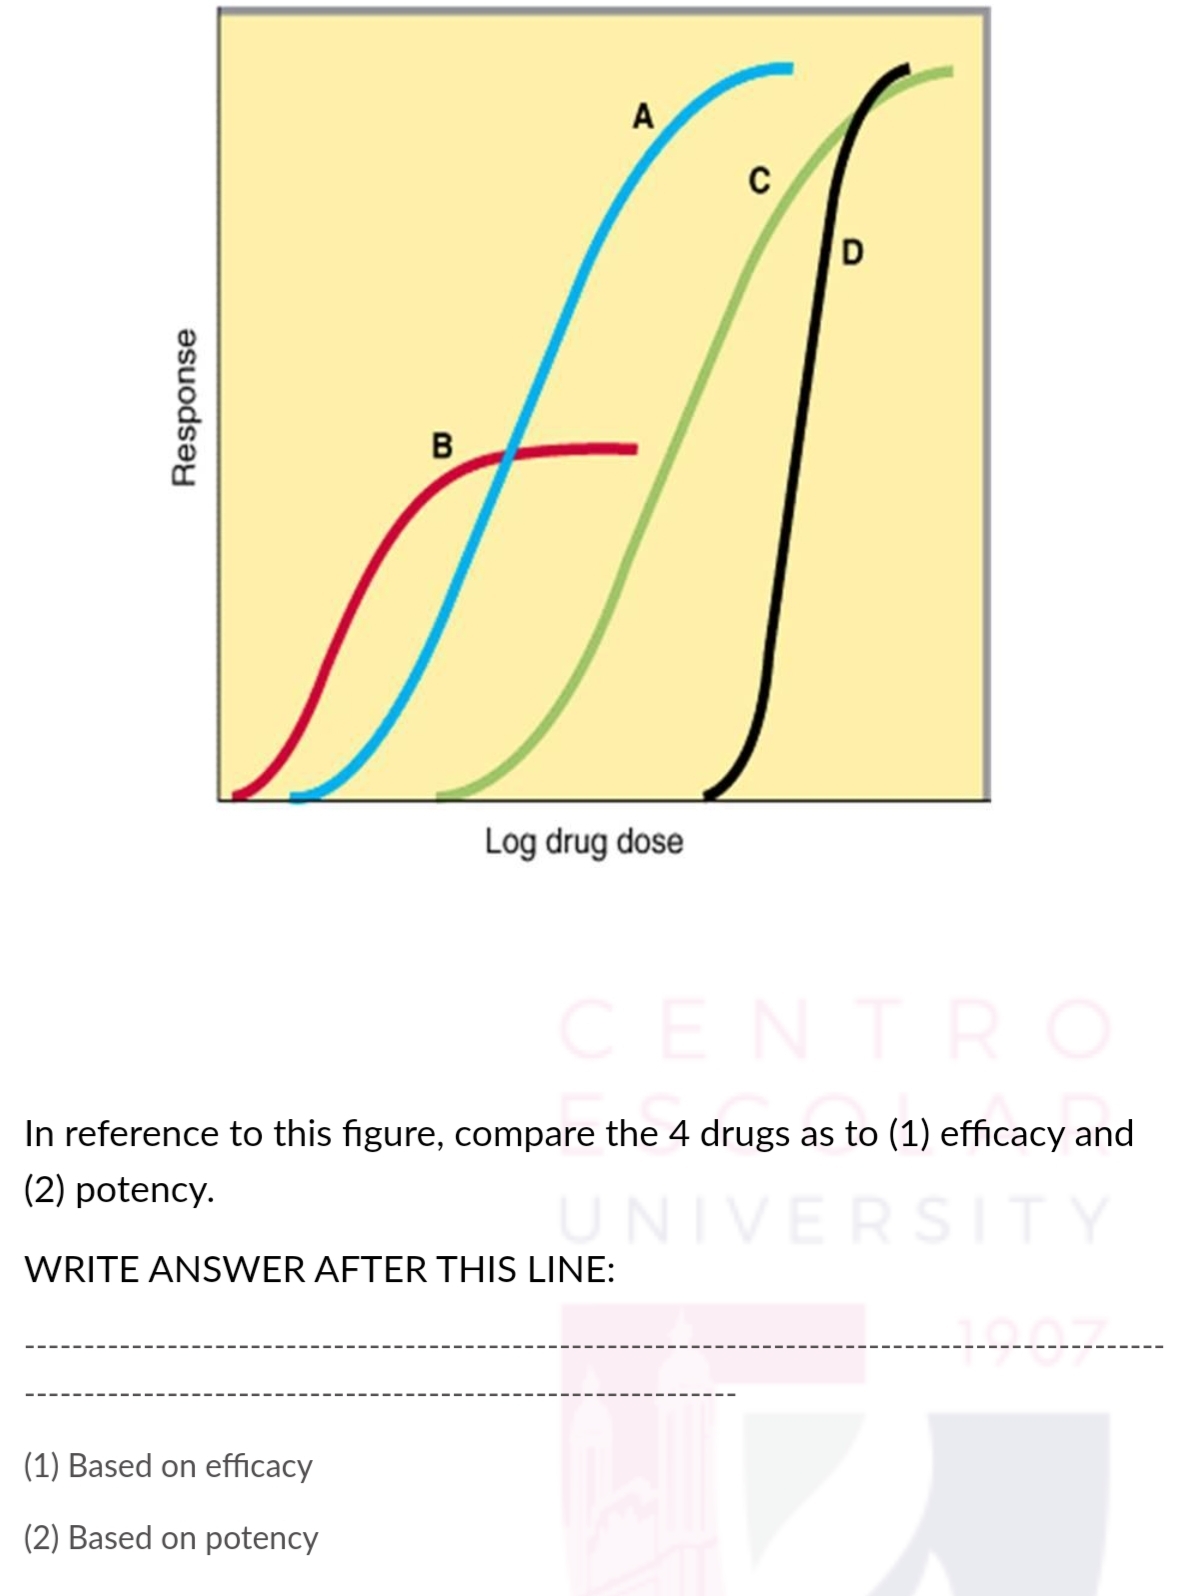 A
C
D
B
Log drug dose
CENTR O
In reference to this figure, compare the 4 drugs as to (1) efficacy and
SENTE
(2) potency.
UNIVERSITY
WRITE ANSWER AFTER THIS LINE:
(1) Based on efficacy
(2) Based on potency
Response
